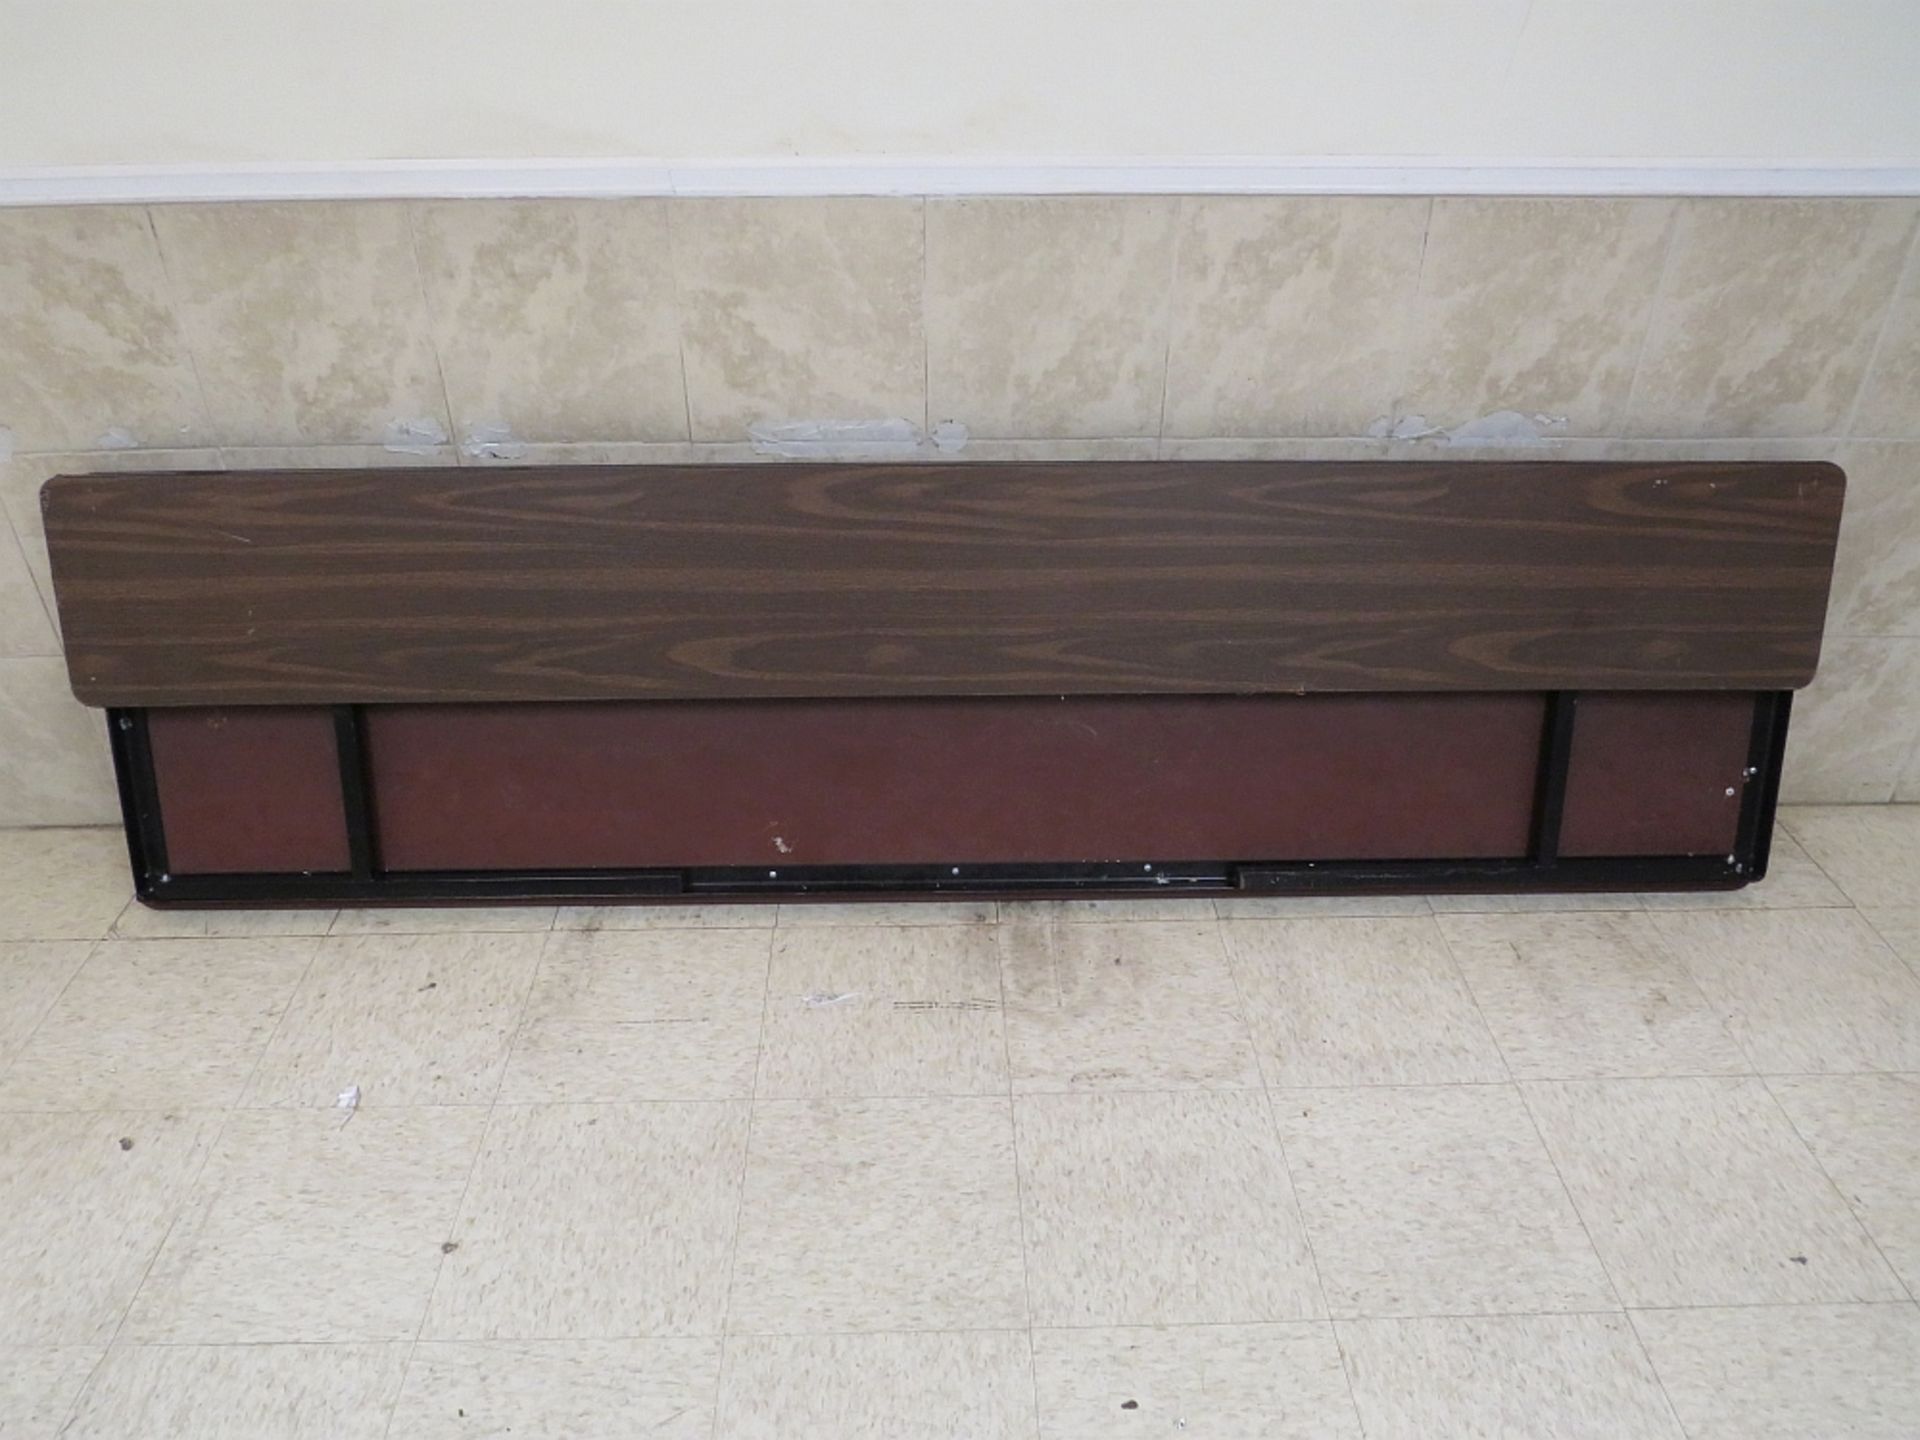 Table Rect - 89 in x 24 in - Wood Grain/Privacy Panel - Image 2 of 2